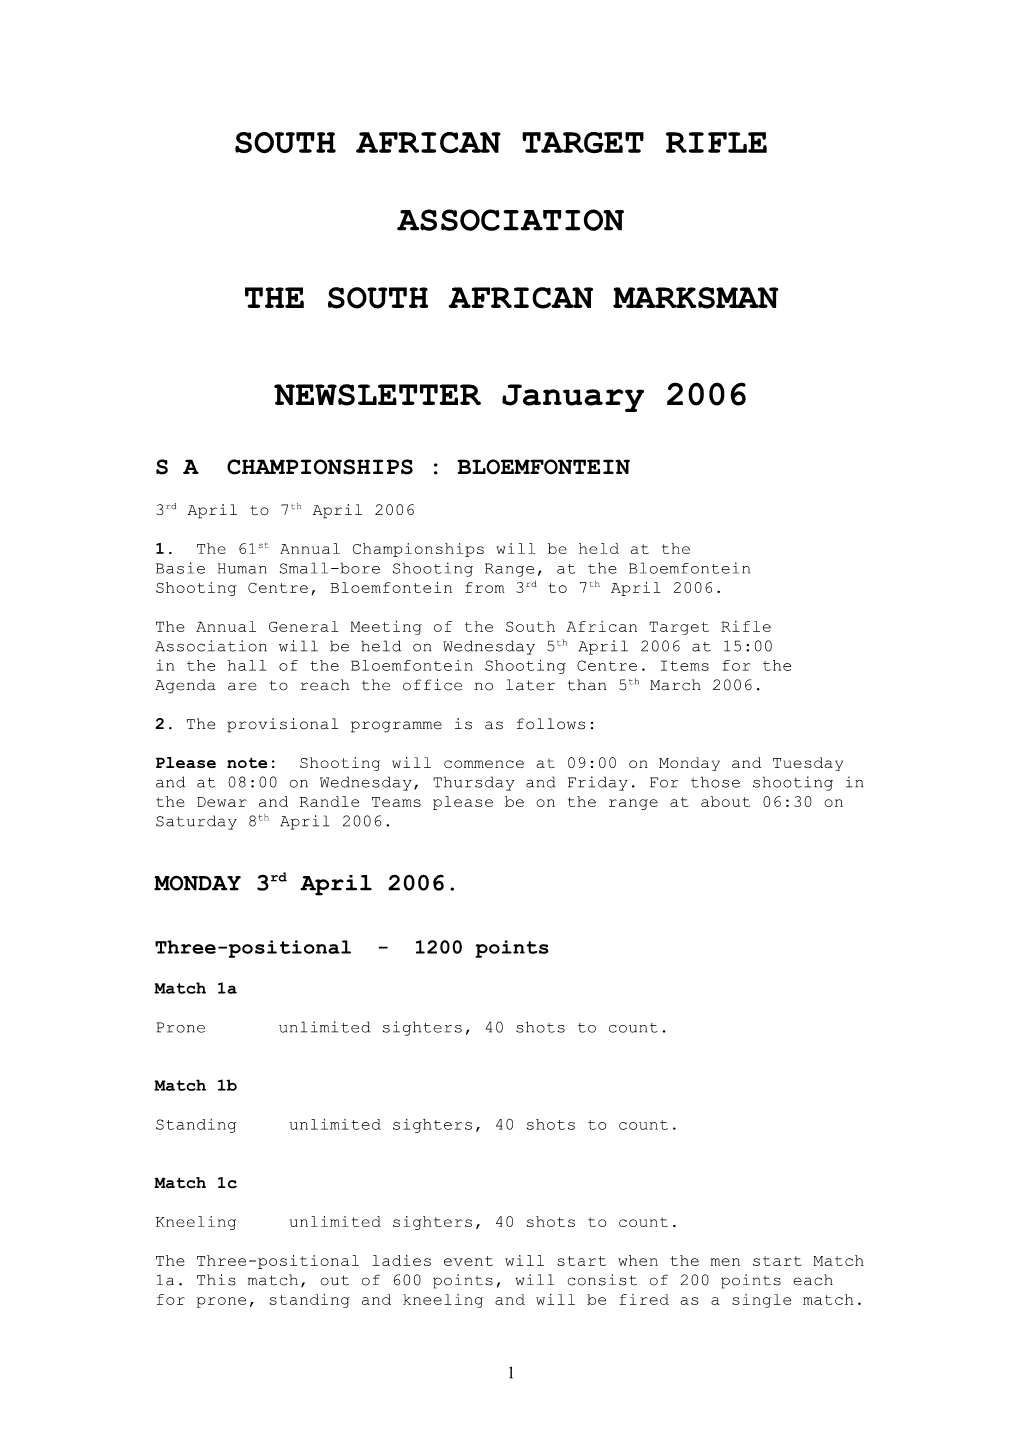 The South African Marksman